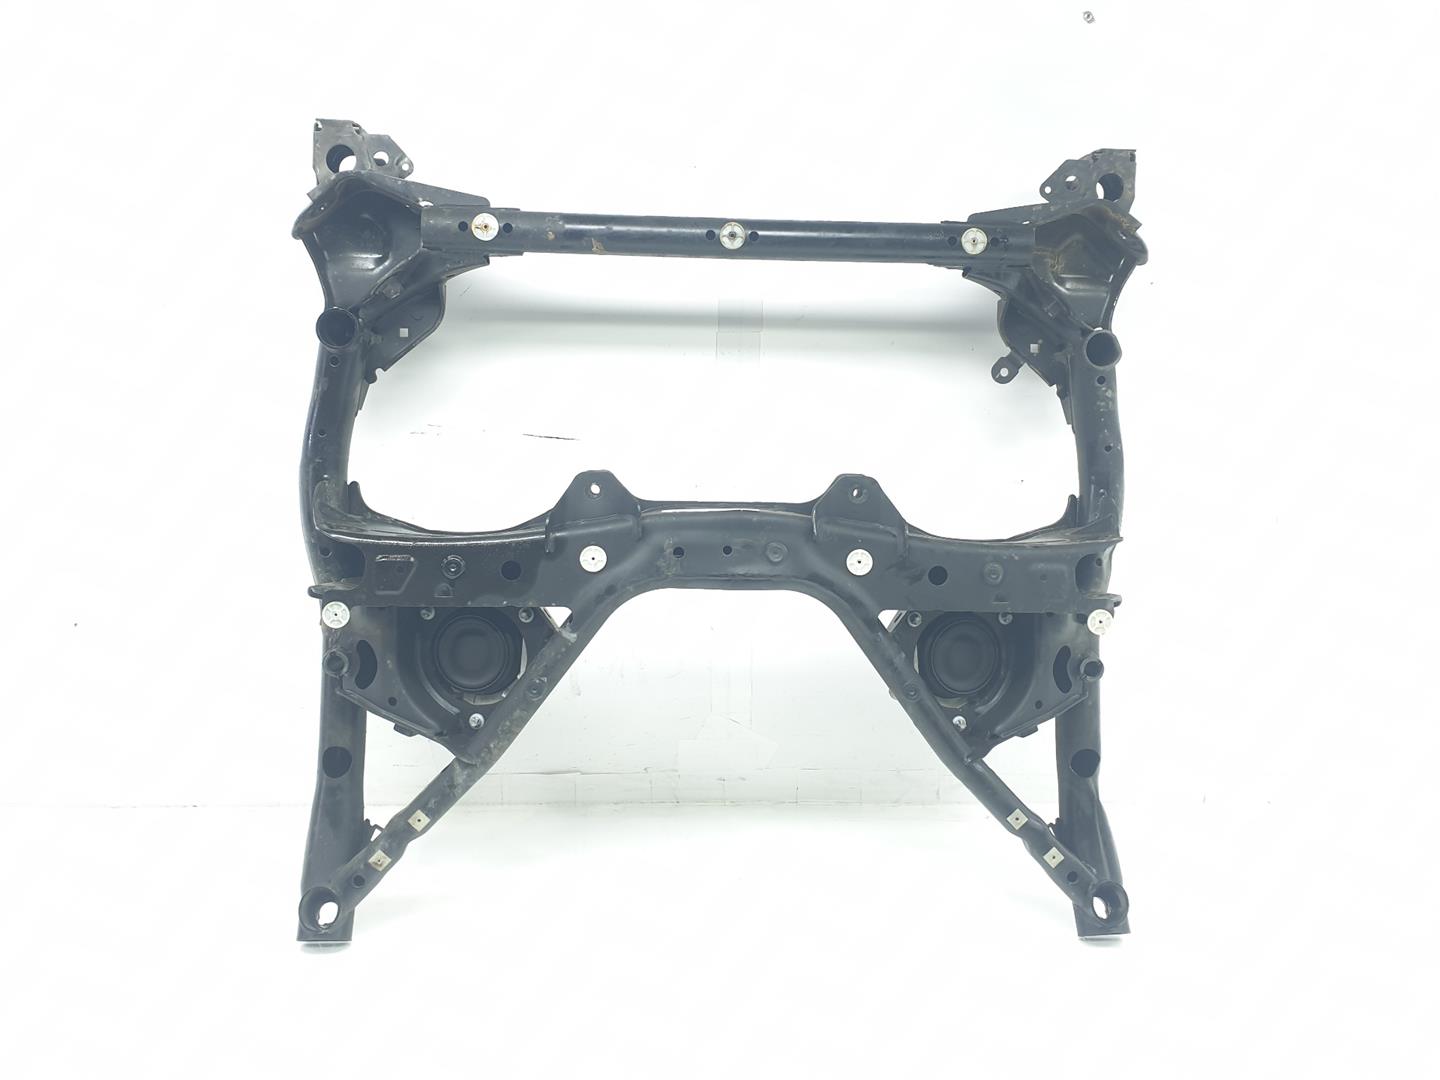 BMW 1 Series F20/F21 (2011-2020) Front Suspension Subframe 6872118, 31106872118 24245521